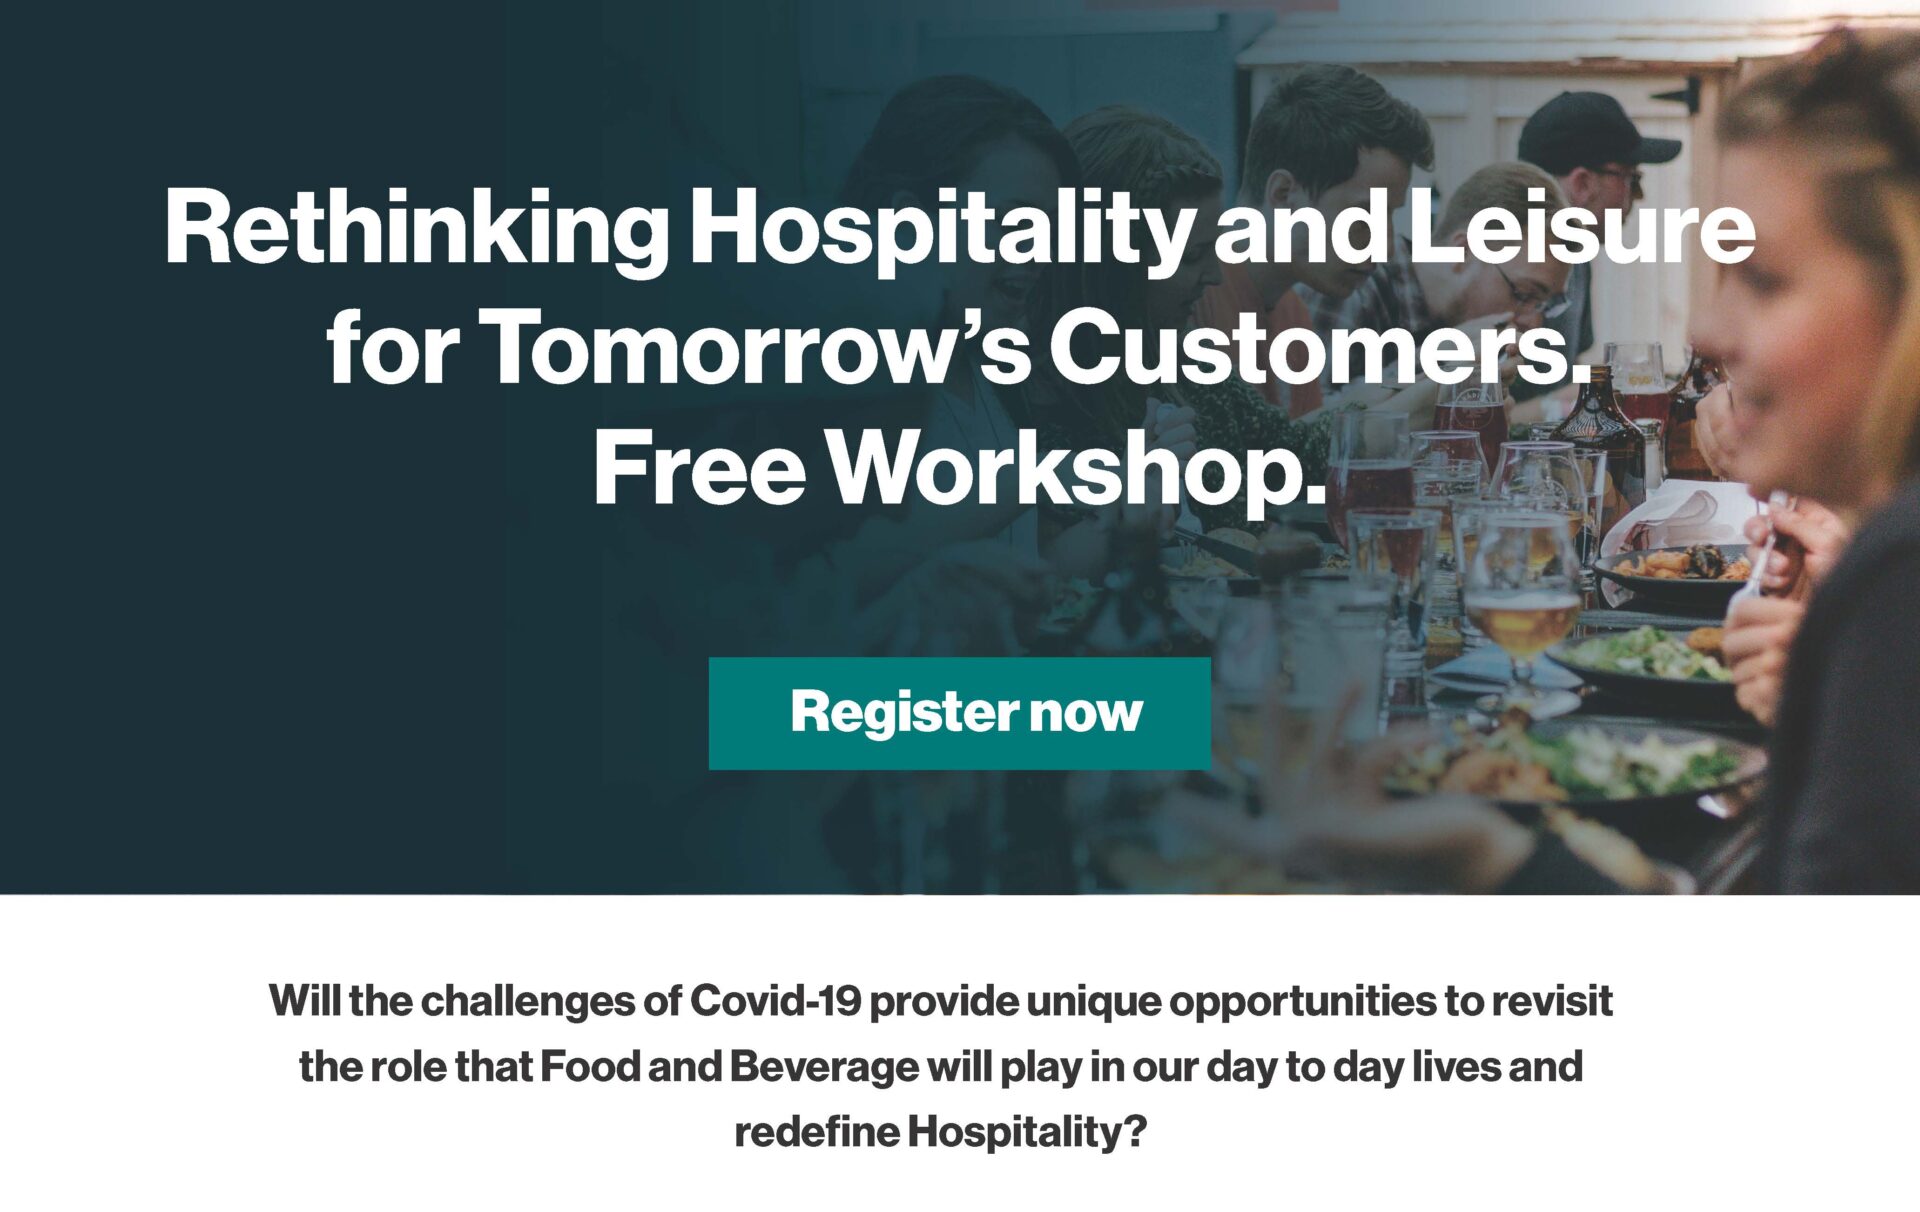 Rethinking Hospitality and Leisure for Tomorrow’s Customers. A Free Workshop.